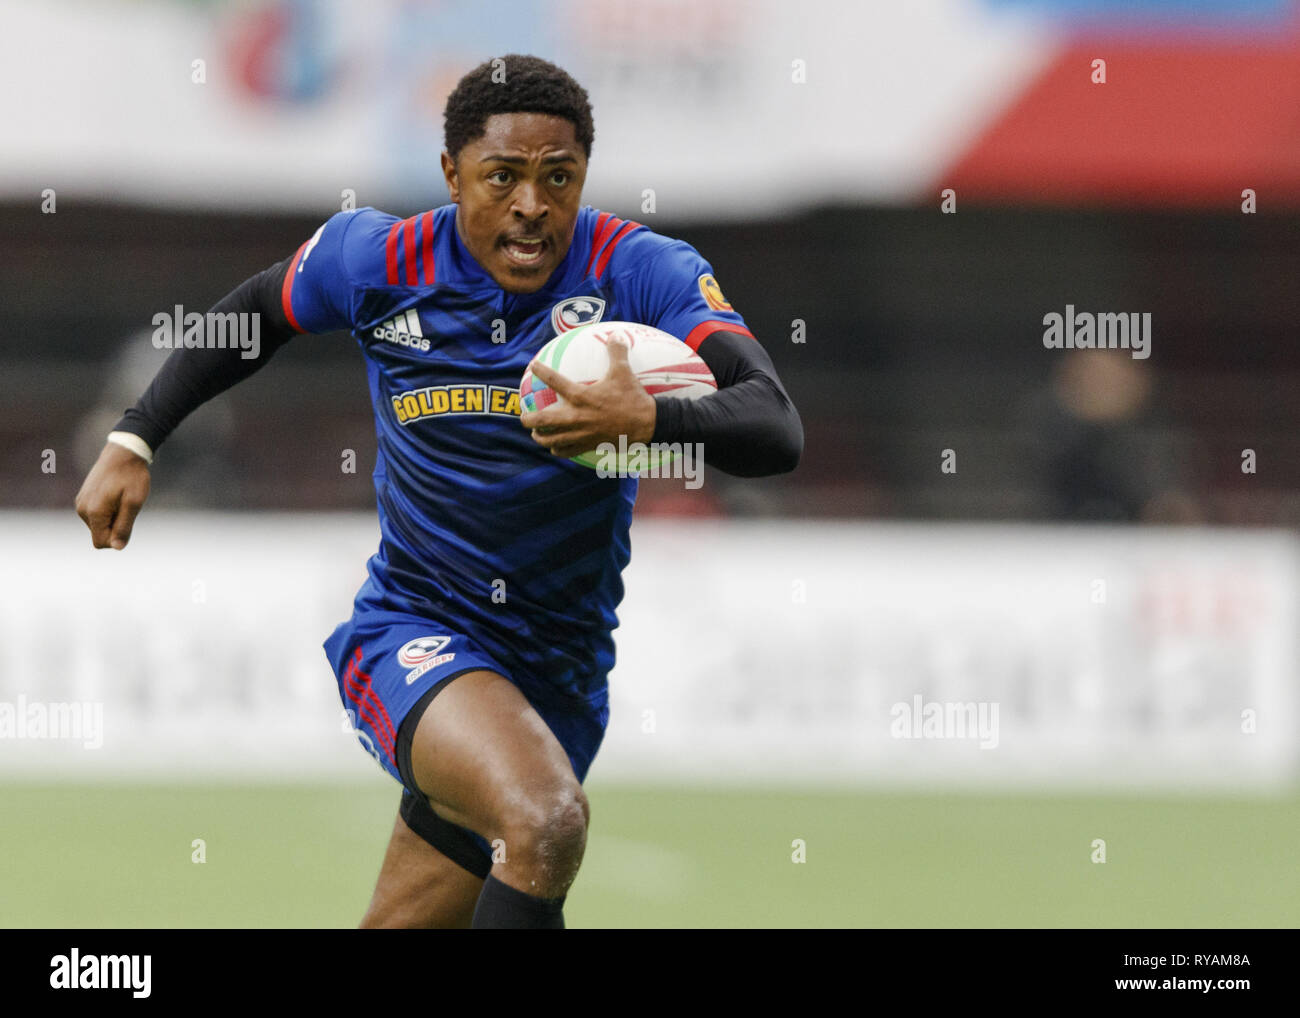 Vancouver, British Columbia, Canada. 10th Mar, 2019. KEVON WILLIAMS #6 of The United States runs with the ball during rugby sevens action on Day 2 of the HSBC Canada Sevens at BC Place on March 10, 2019 in Vancouver, Canada. Credit: Andrew Chin/ZUMA Wire/Alamy Live News Stock Photo